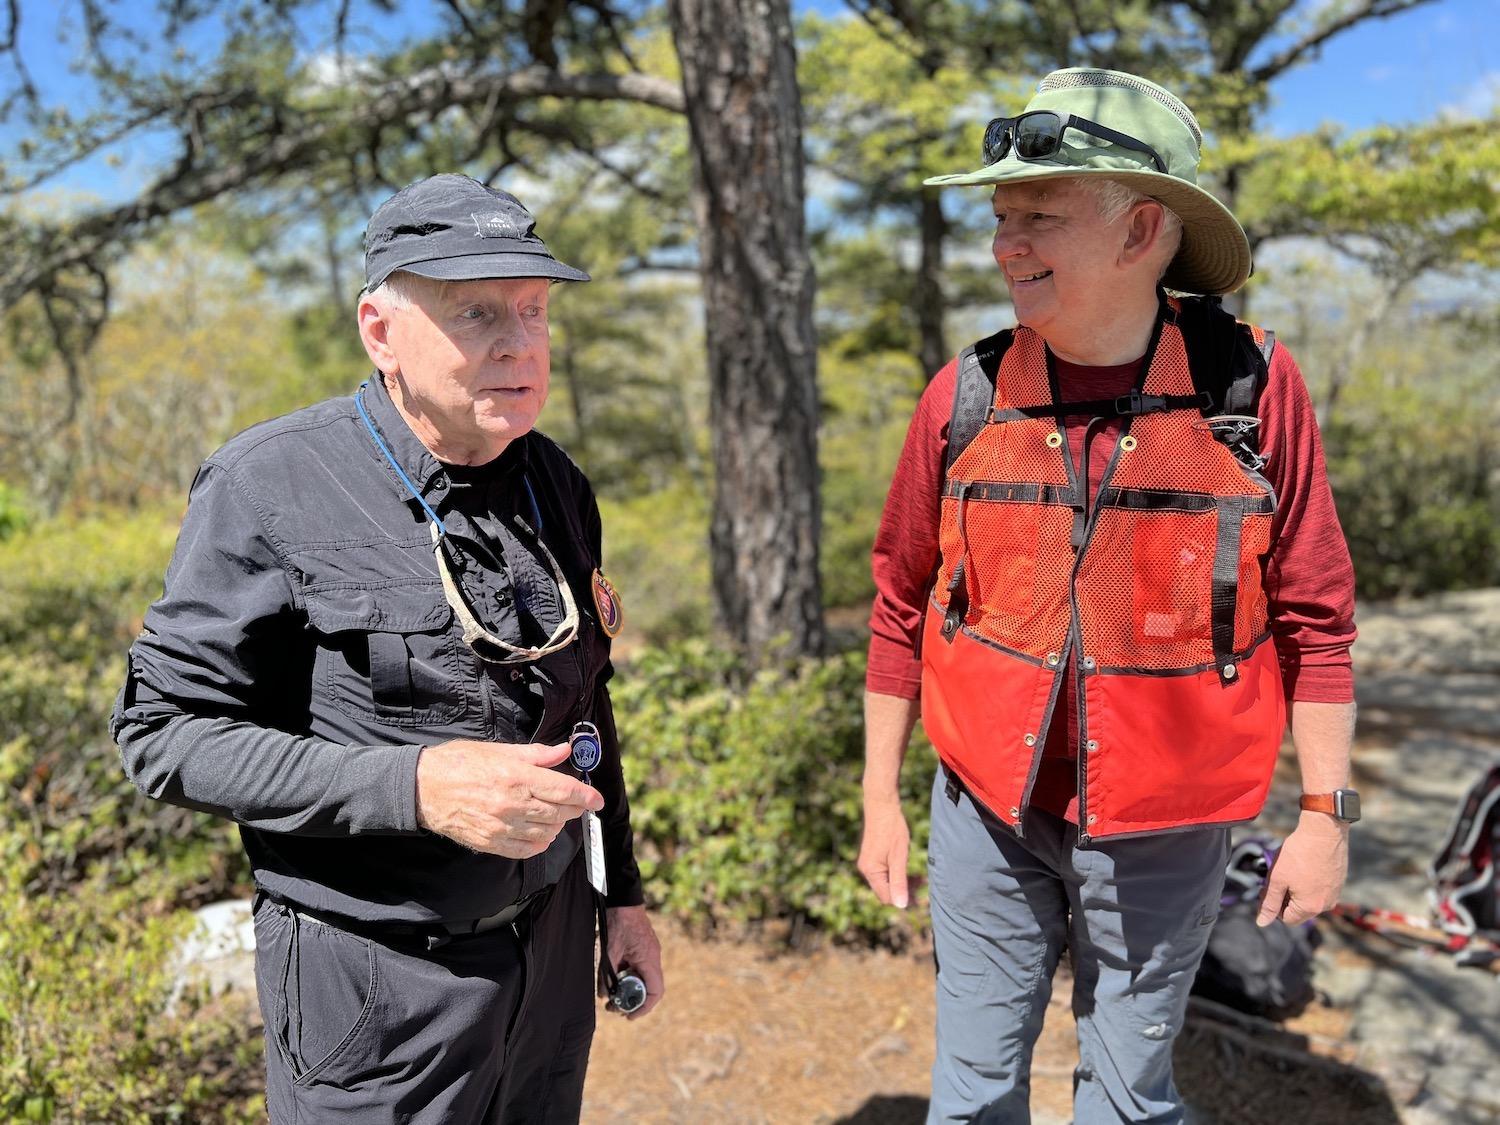 Volunteer ridge runners Bill Dawson, left, and Clive Hillyard, right, chat with each other.